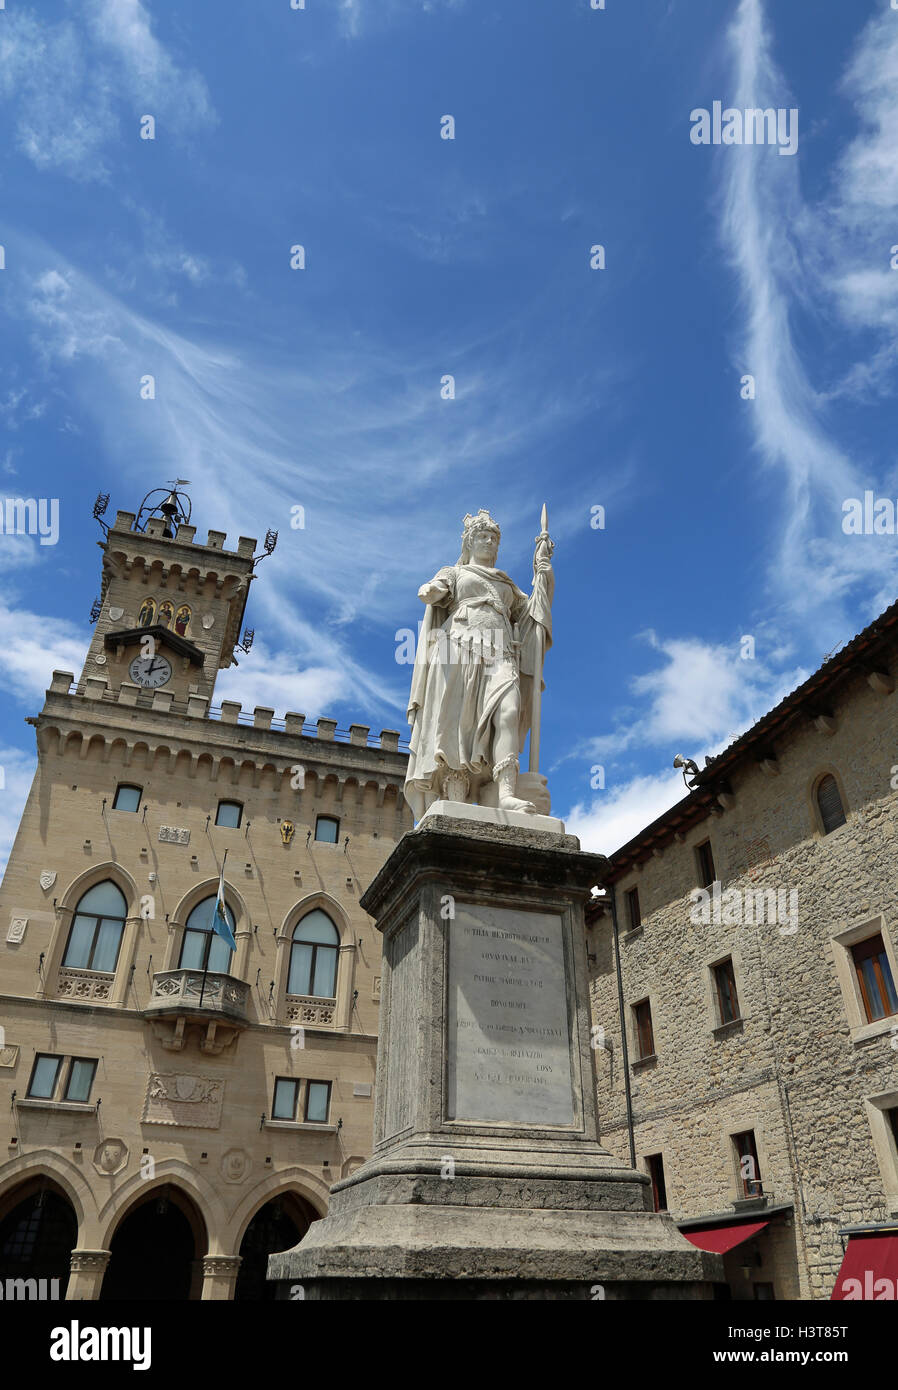 Statue of Liberty in San Marino Country and the ancient palace called Palazzo Pubblico seat of Government in Central Italy and b Stock Photo